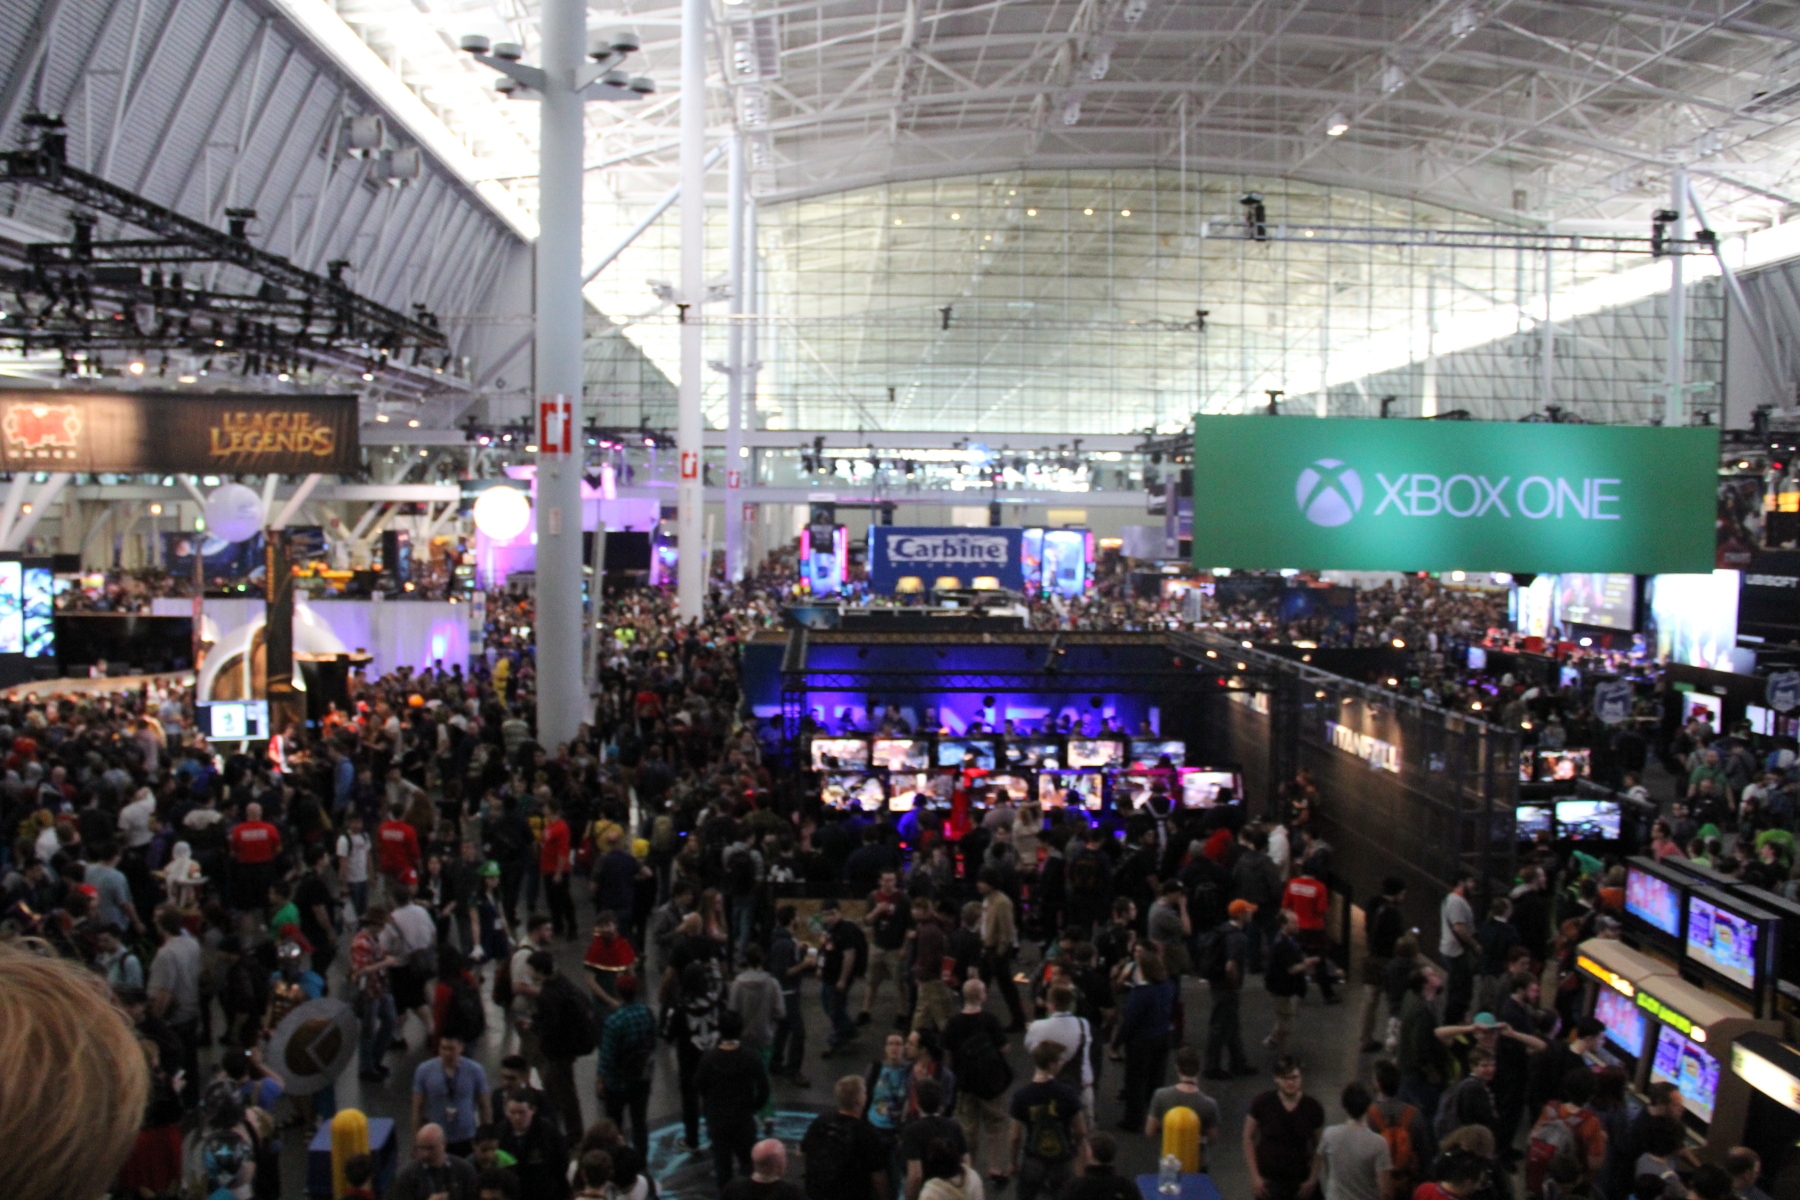 PAX East 2014: Cosplay and More From the Show Floor! - Page 2 of 2 ...